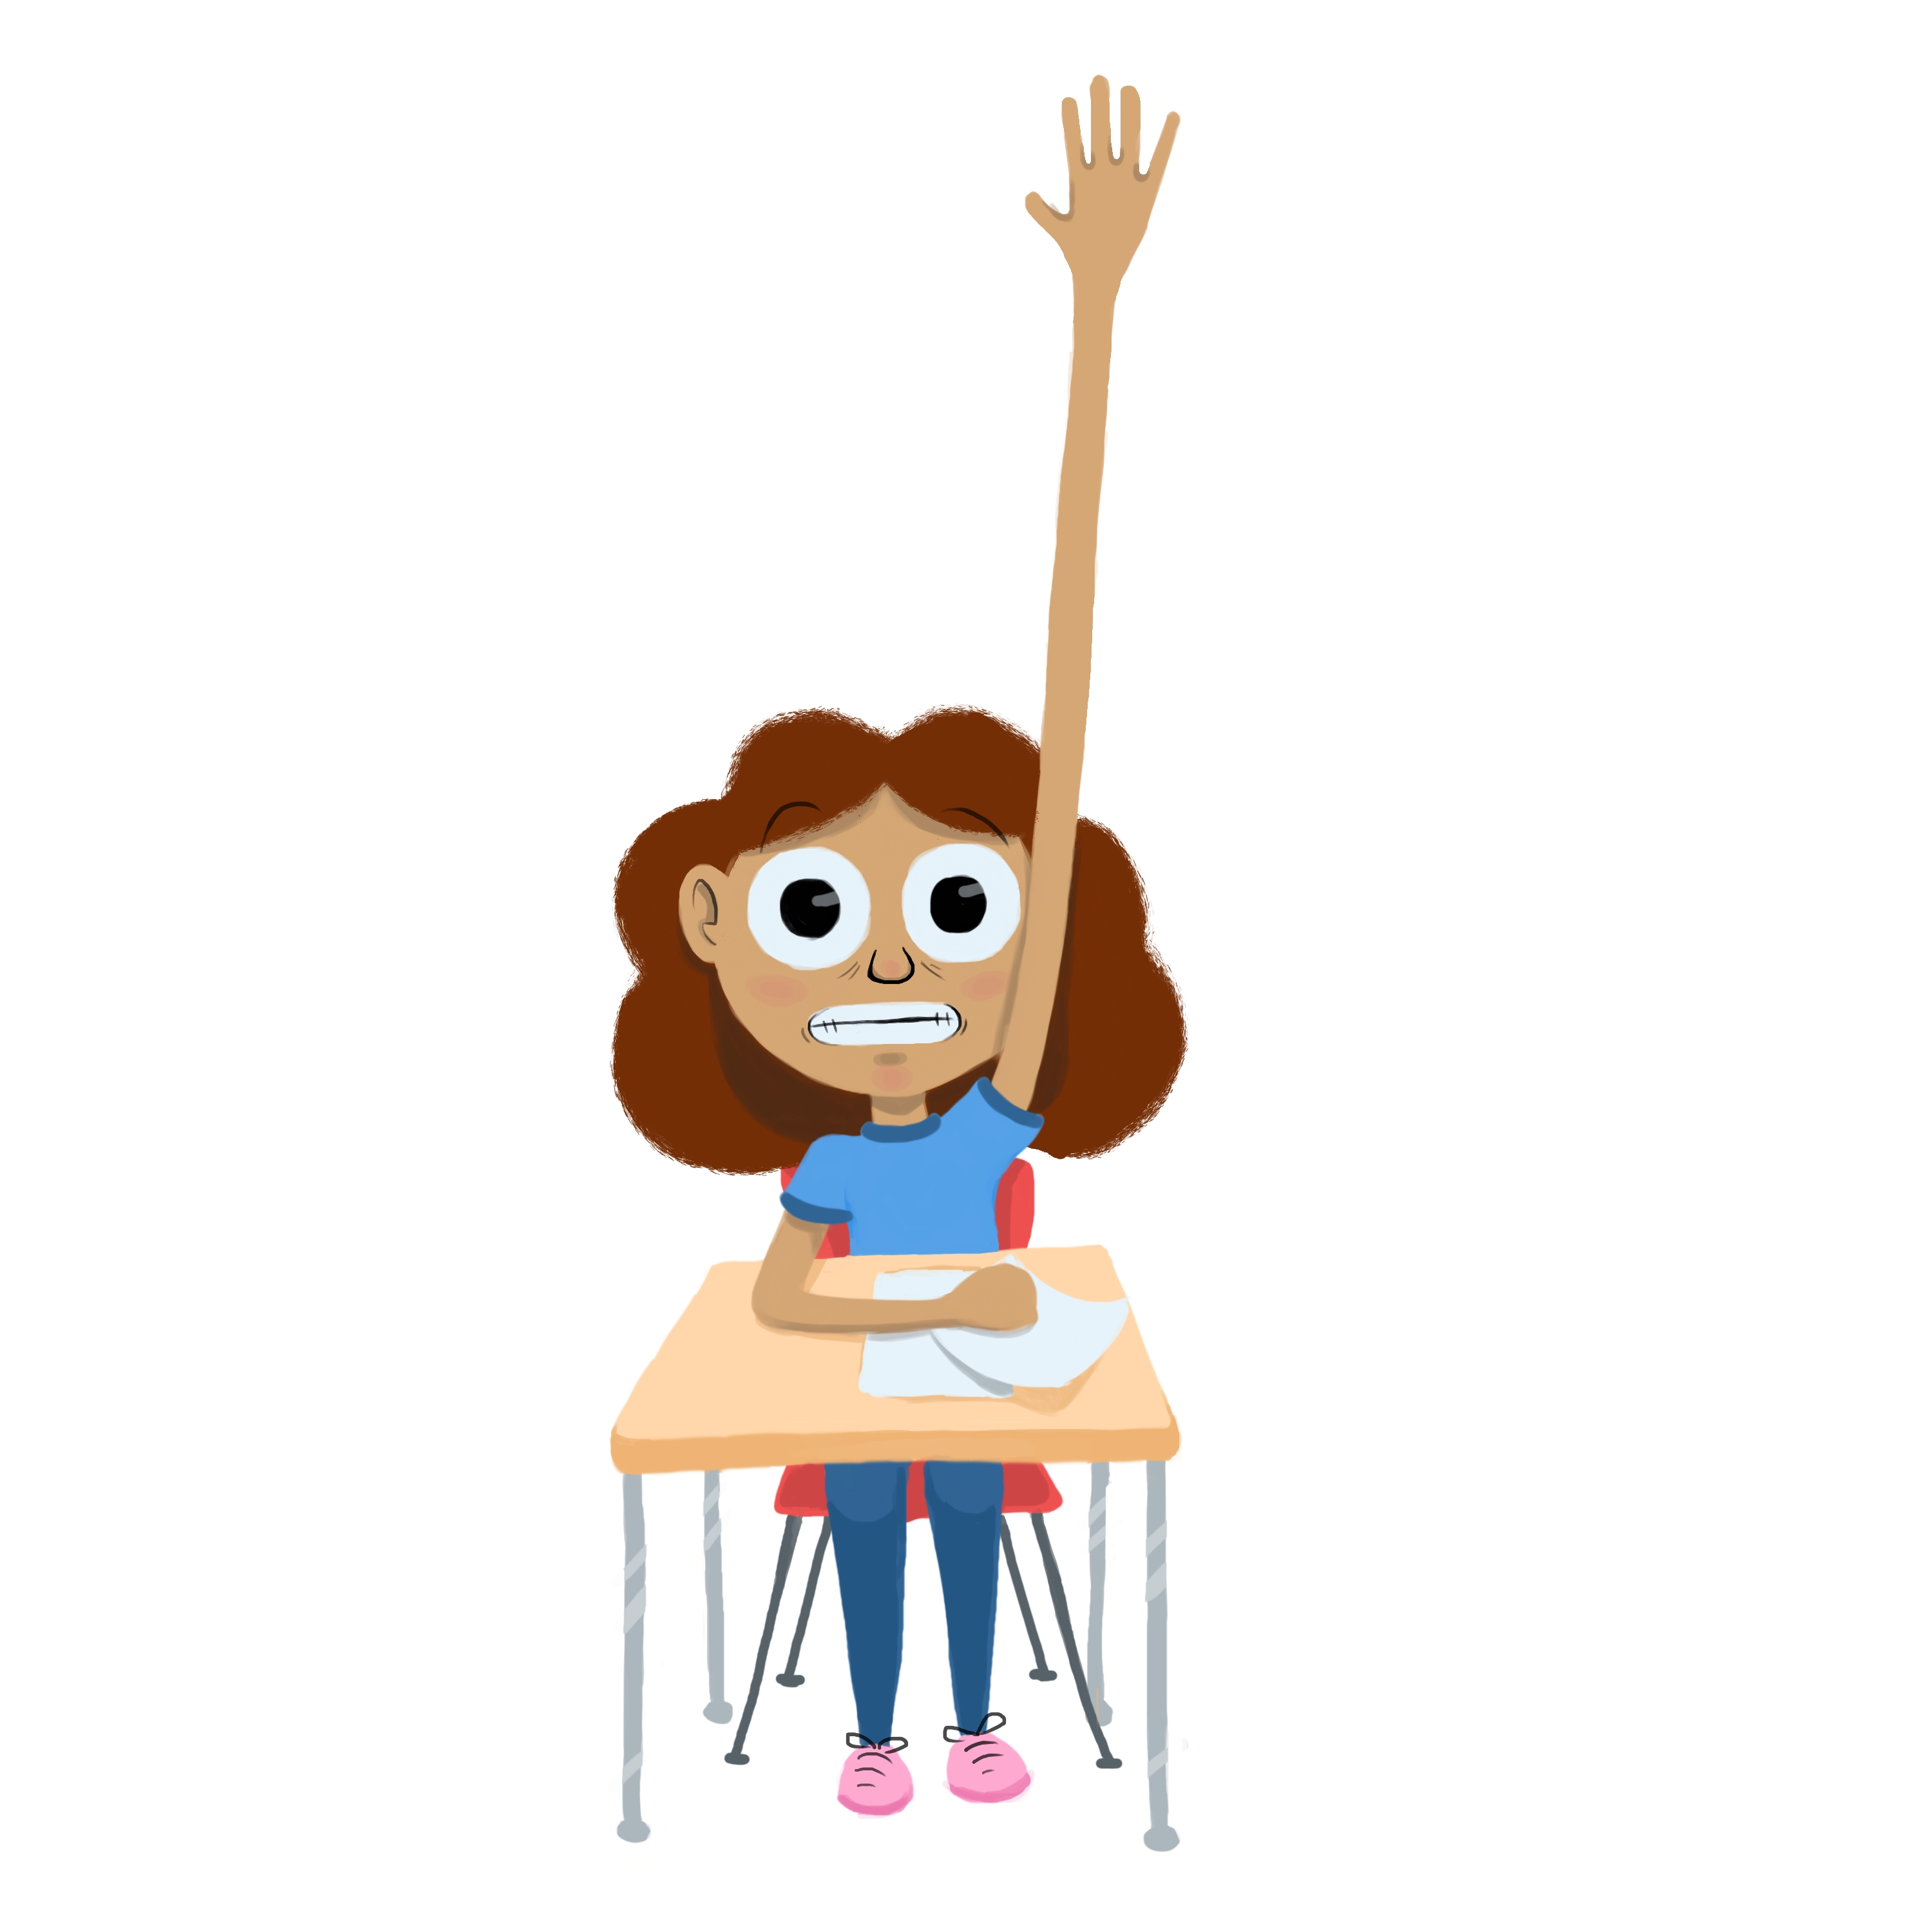 A brief taxonomy of why people raise their hands in class